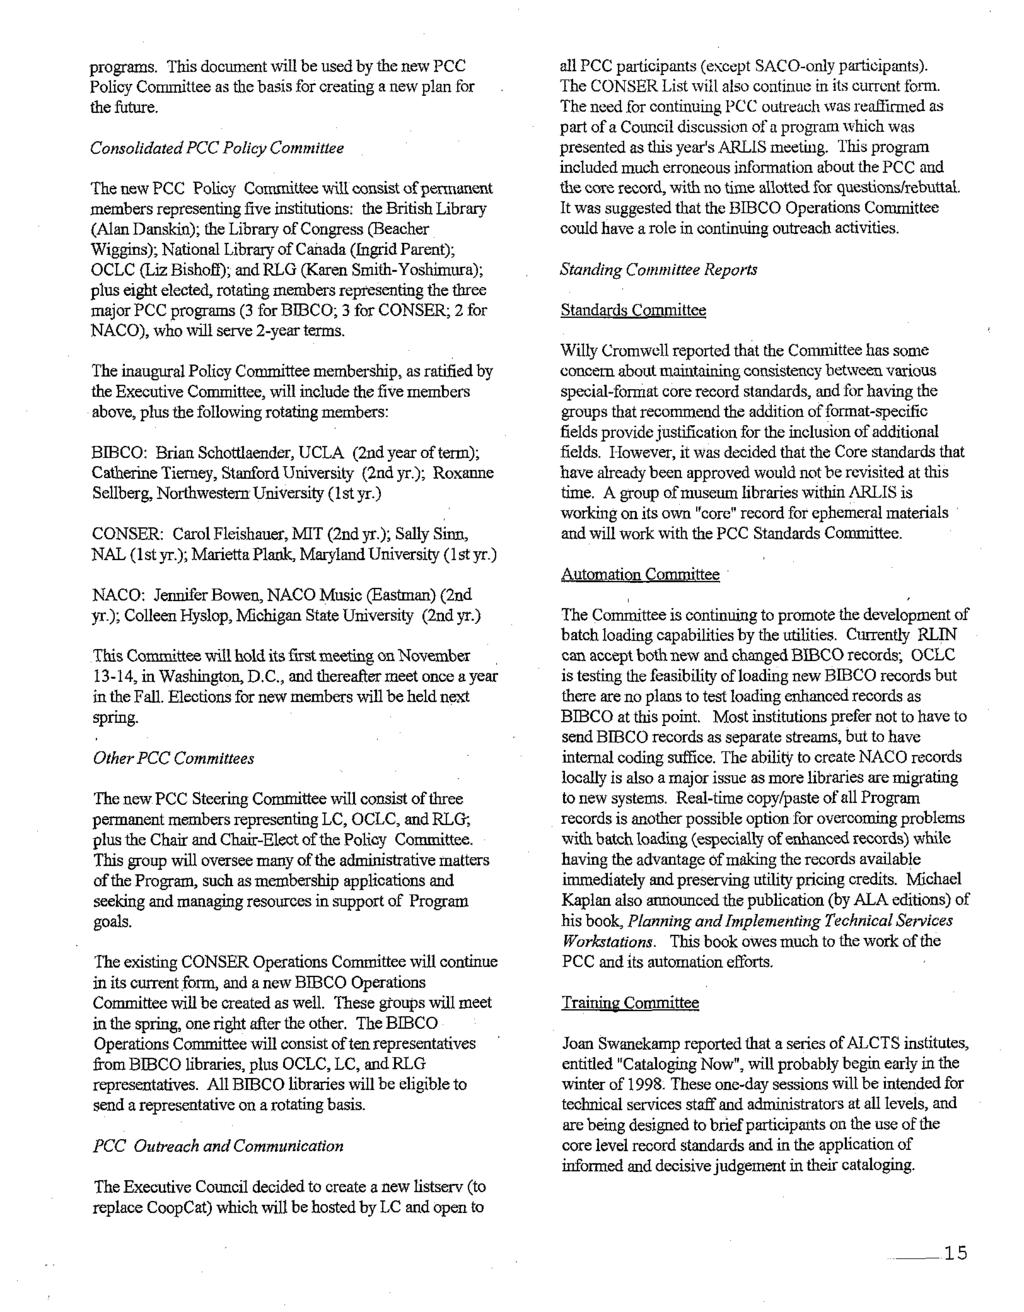 programs. This document will be used by the new PCC Policy Cormnittee as the basis for creating a new plan for the future. Consolidated PCC Policy Committee The new PCC Policy Committee.